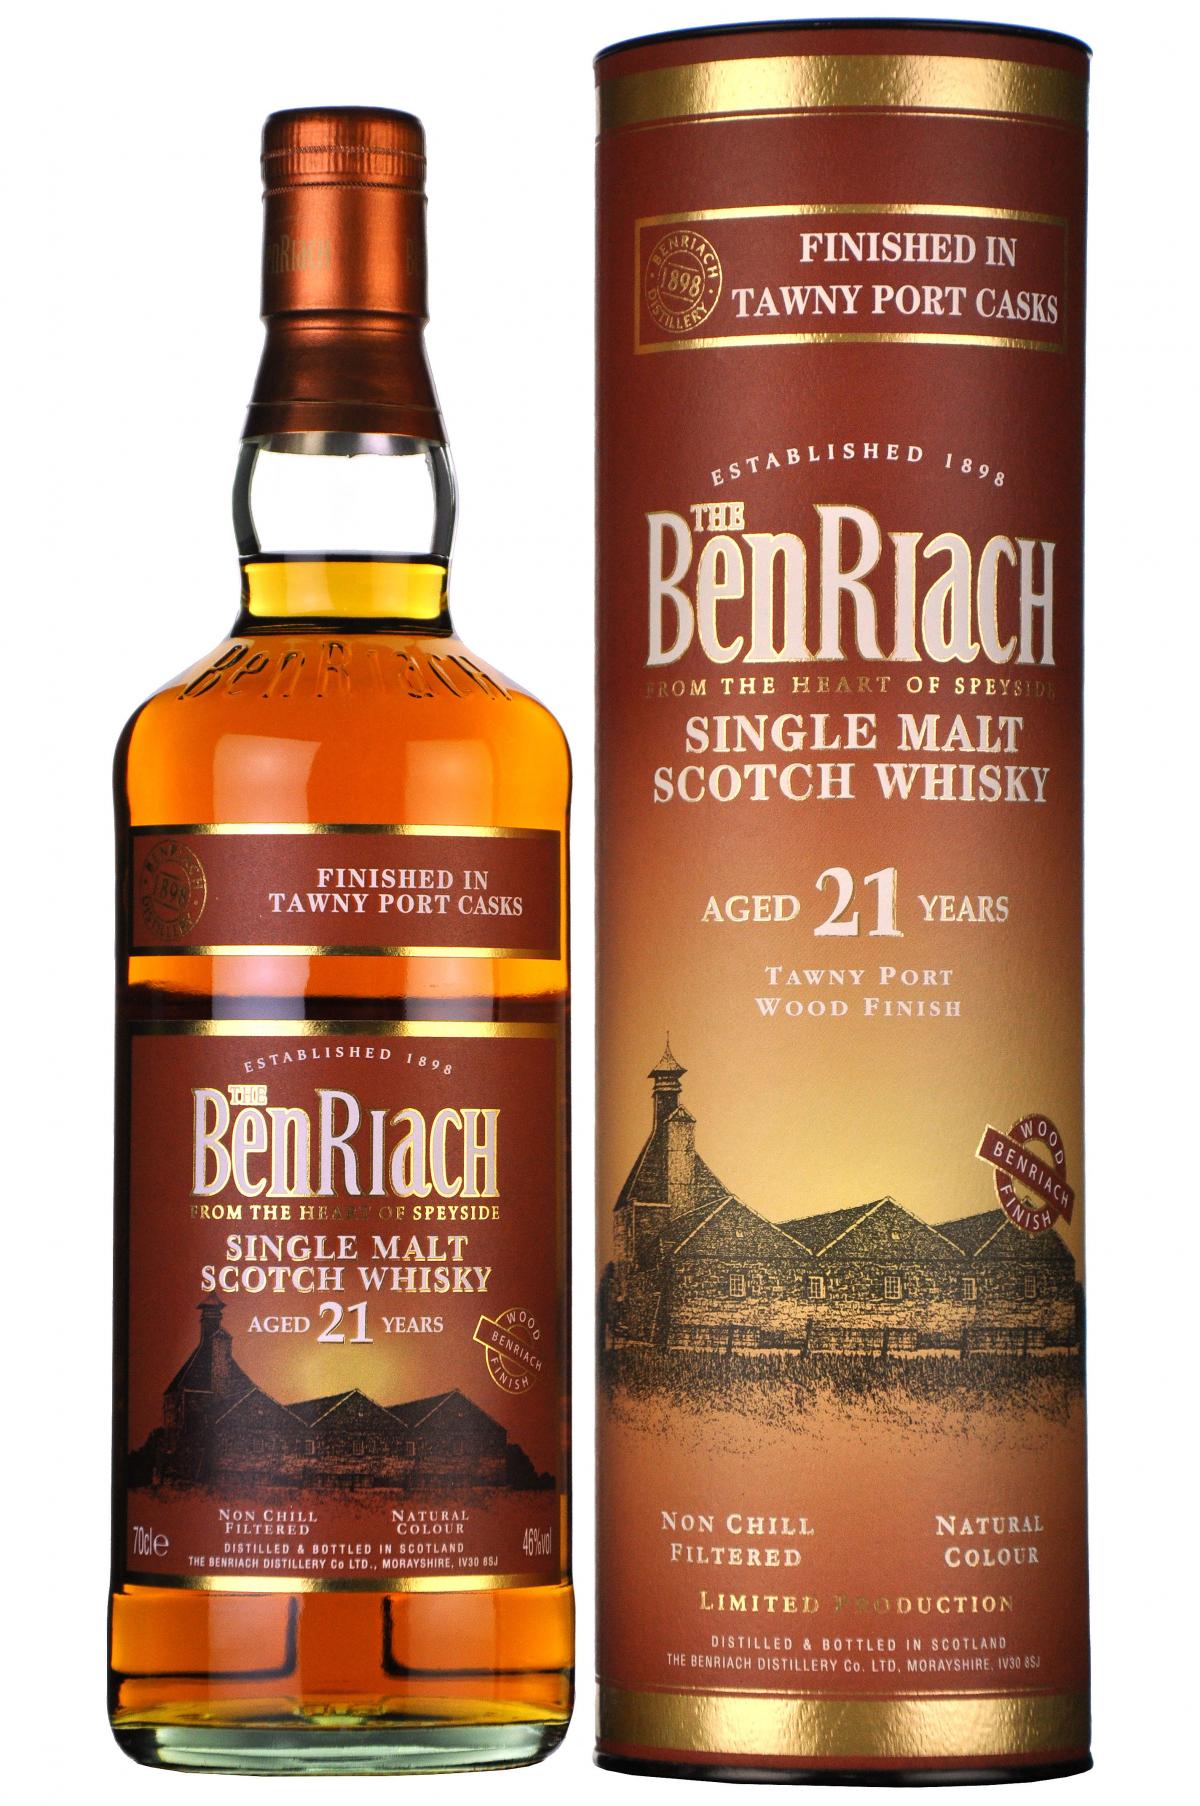 Benriach 21 Year Old Tawny Port